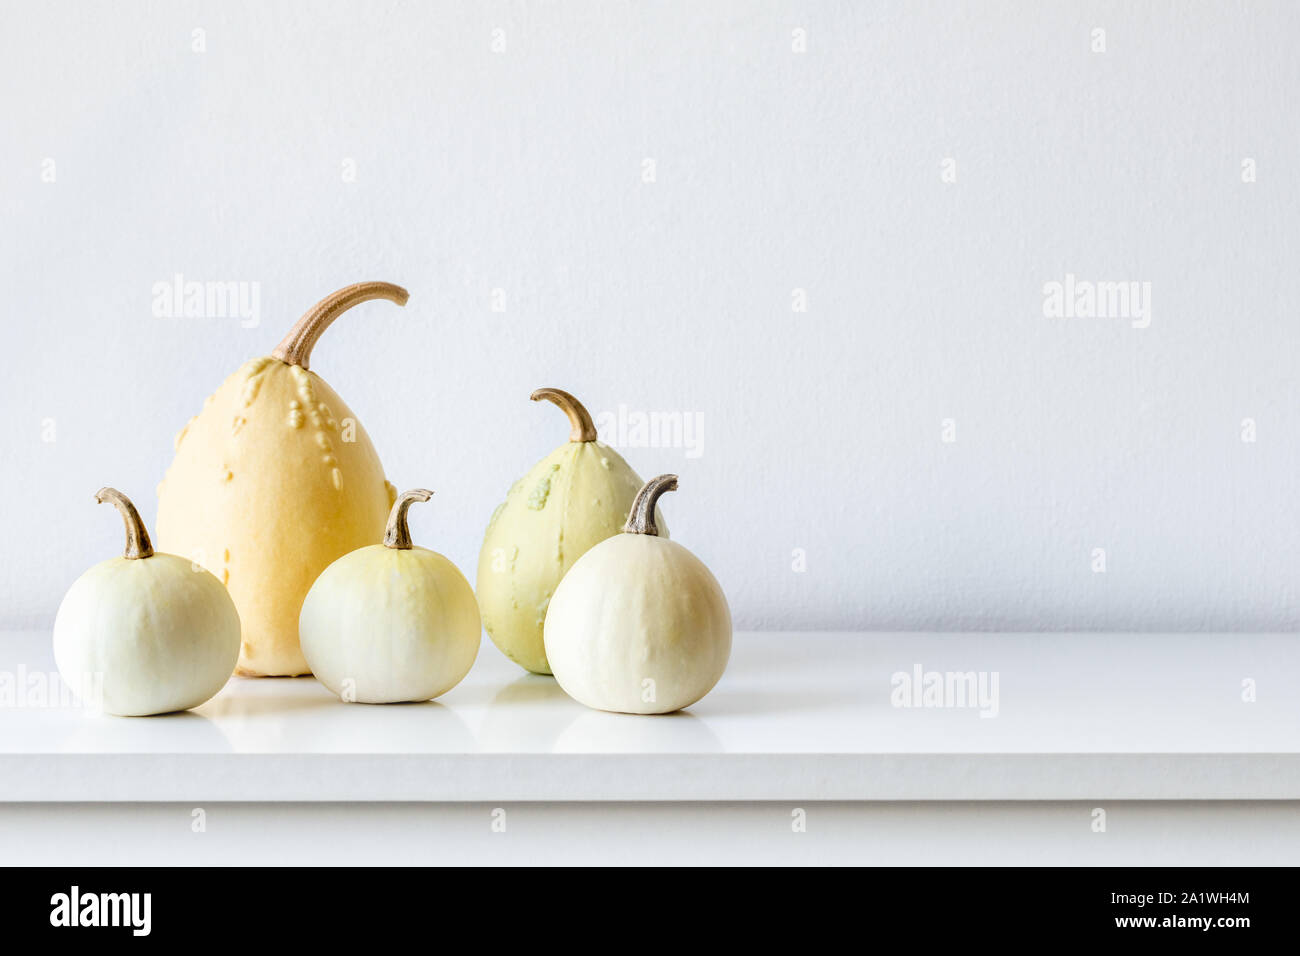 Happy Thanksgiving Background. Selection of various pumpkins on white shelf against white wall. Modern minimal autumn inspired room decoration. Stock Photo